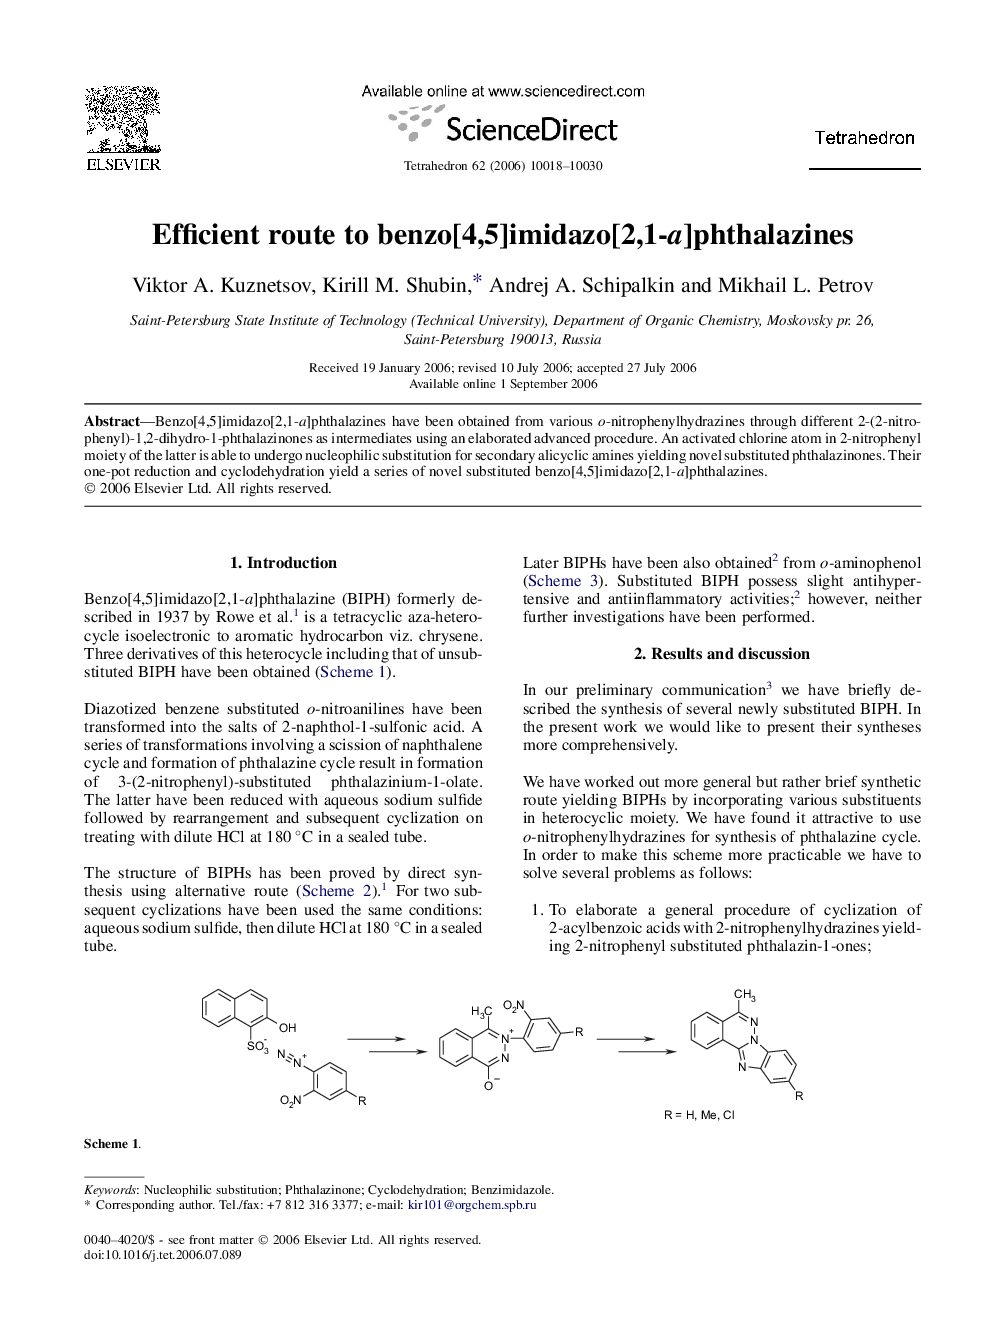 Efficient route to benzo[4,5]imidazo[2,1-a]phthalazines